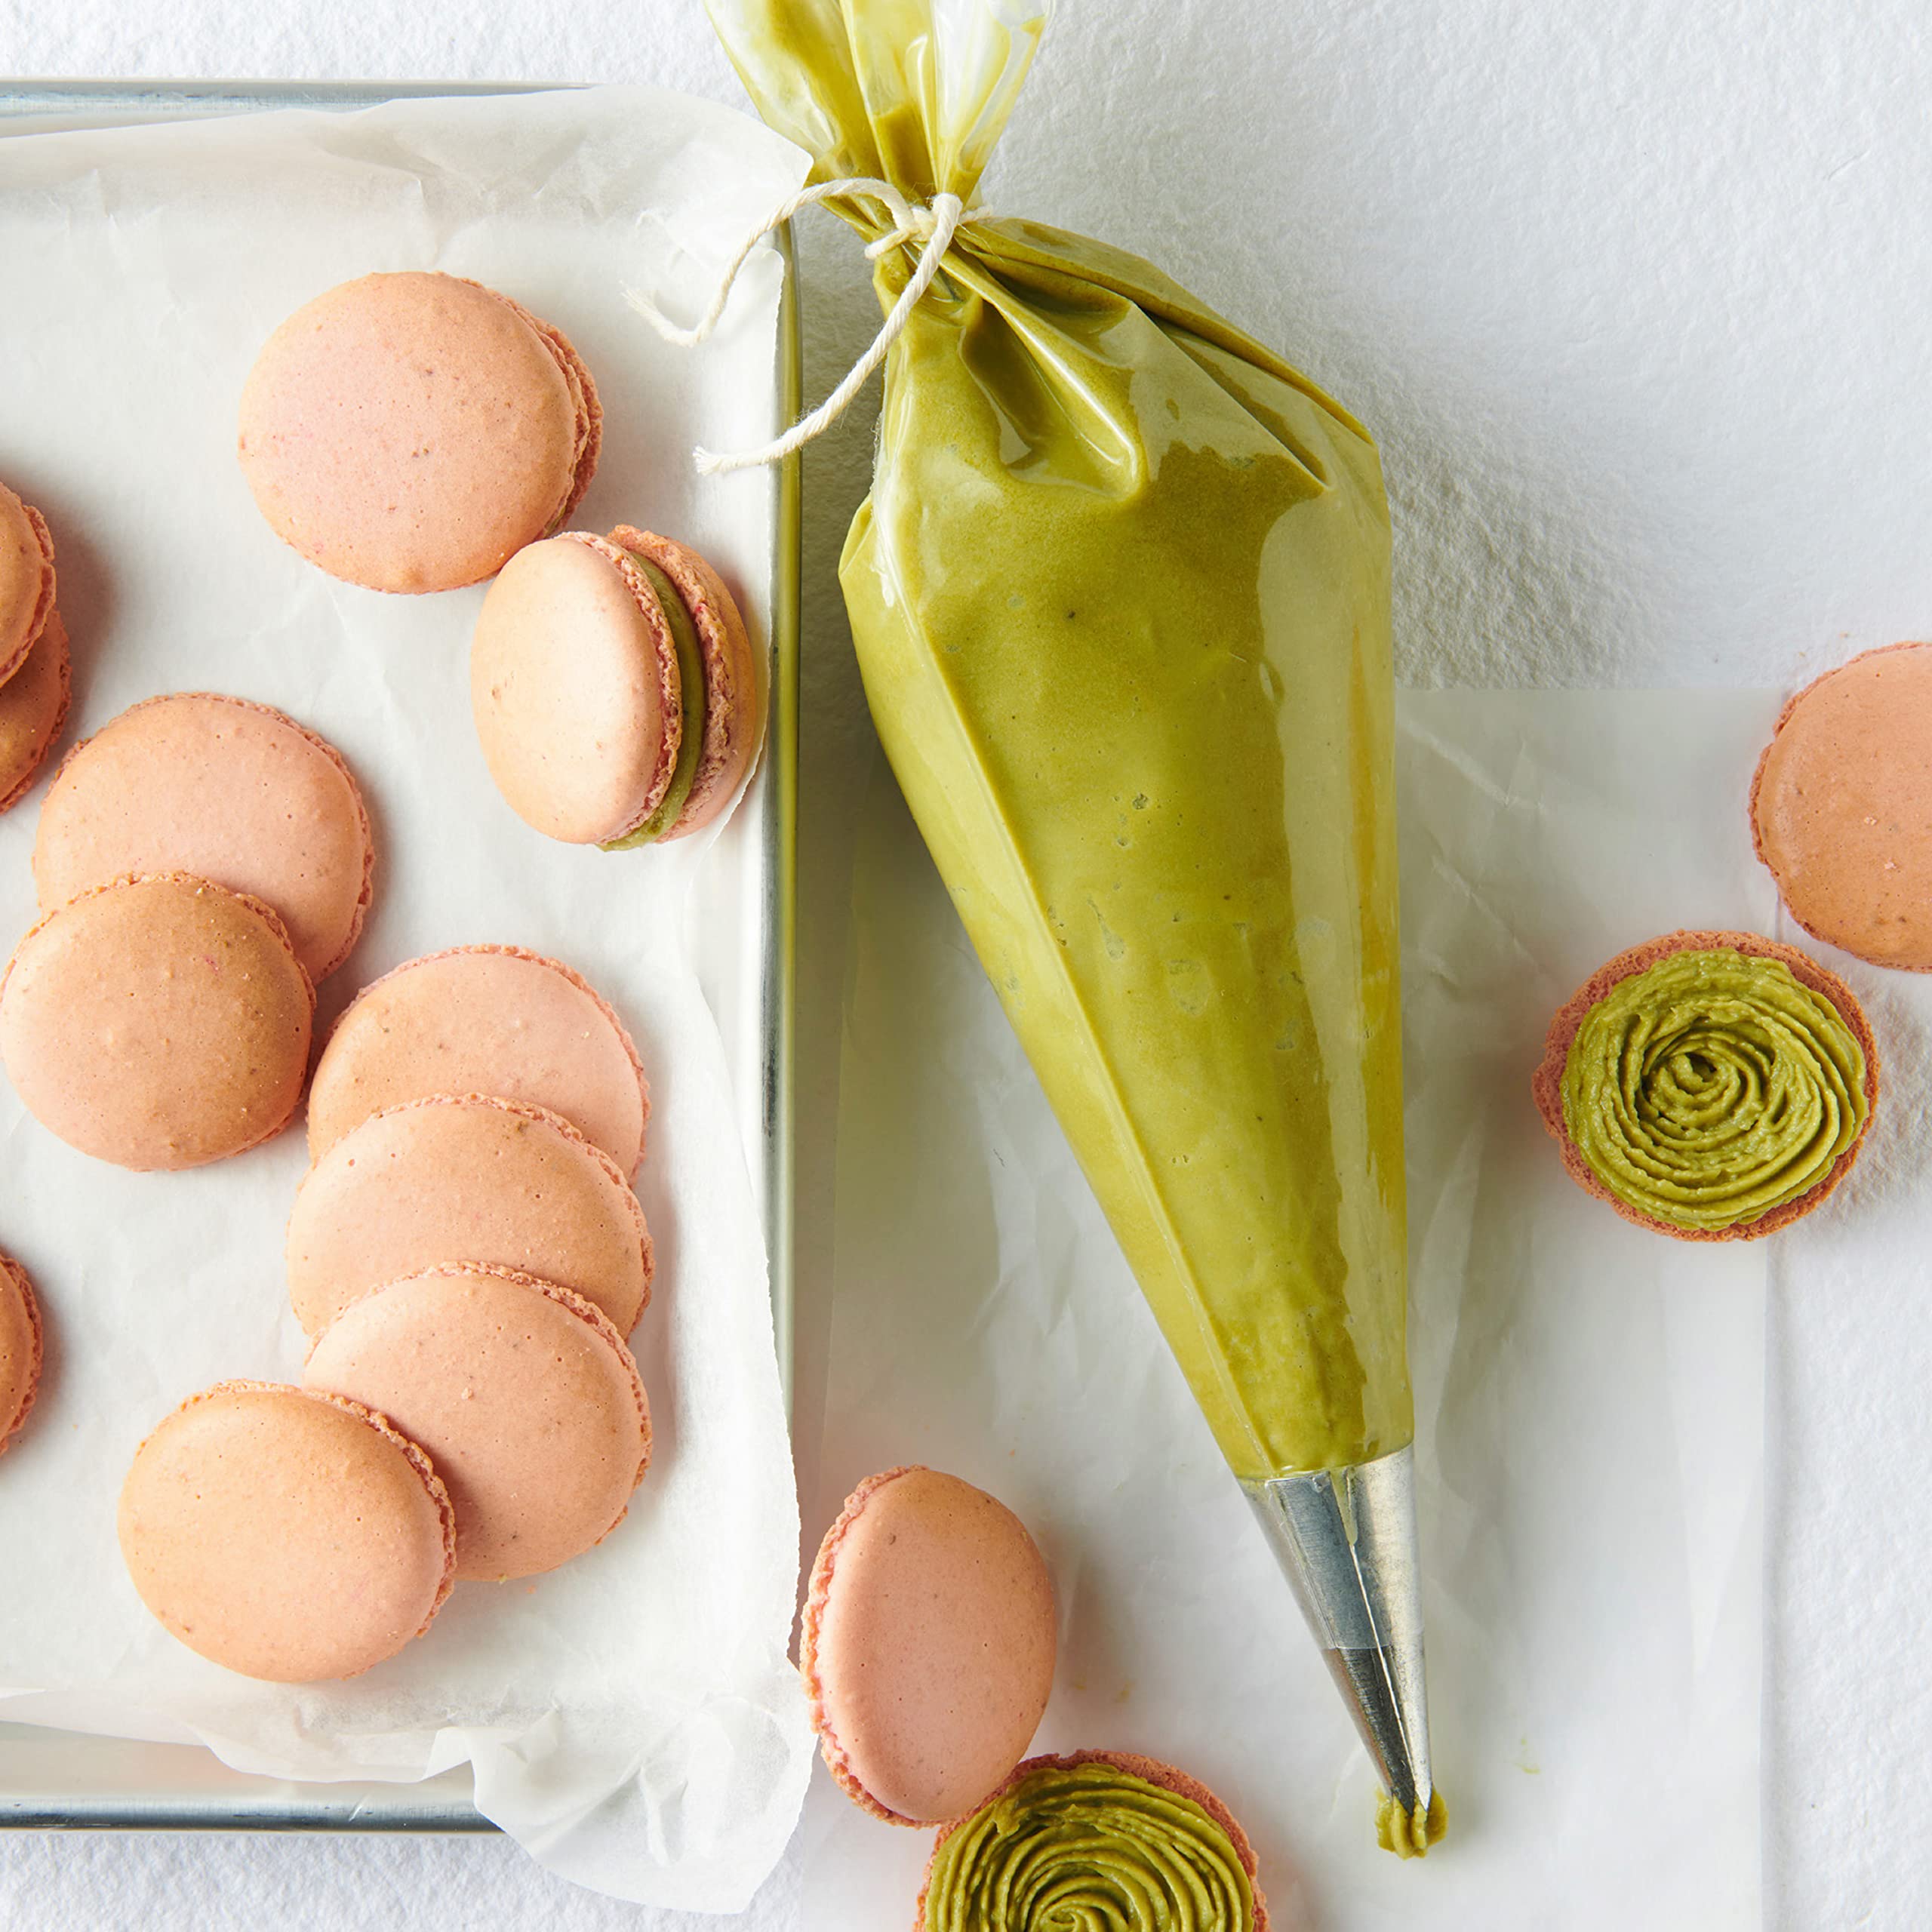 French Macarons for Beginners: Foolproof Recipes with 60 Flavors to Mix & Match